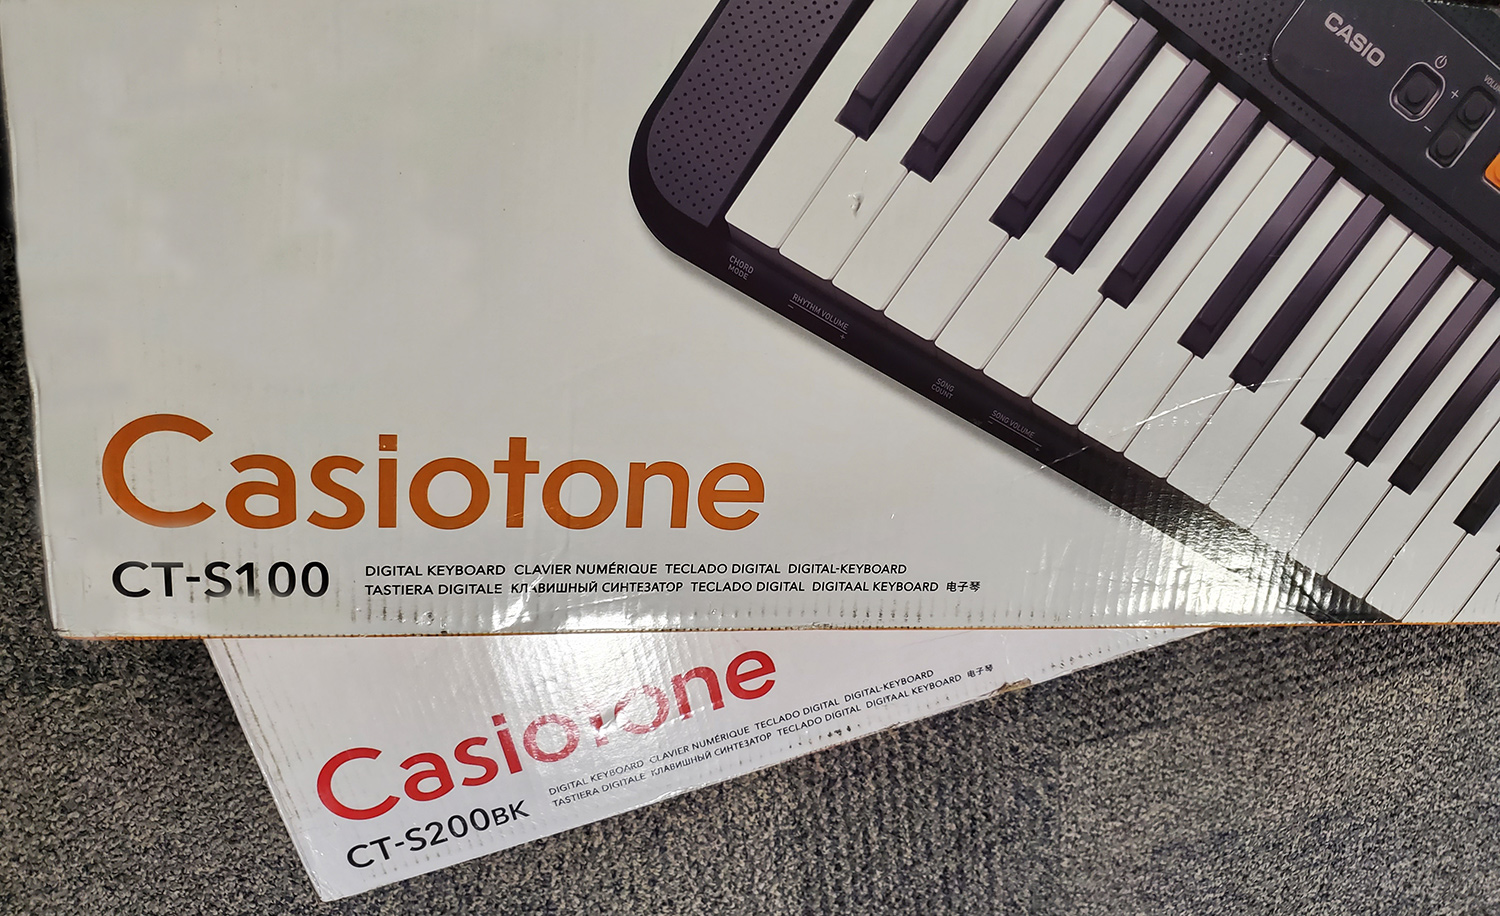 Enter for chance to win a Casio keyboard from Best